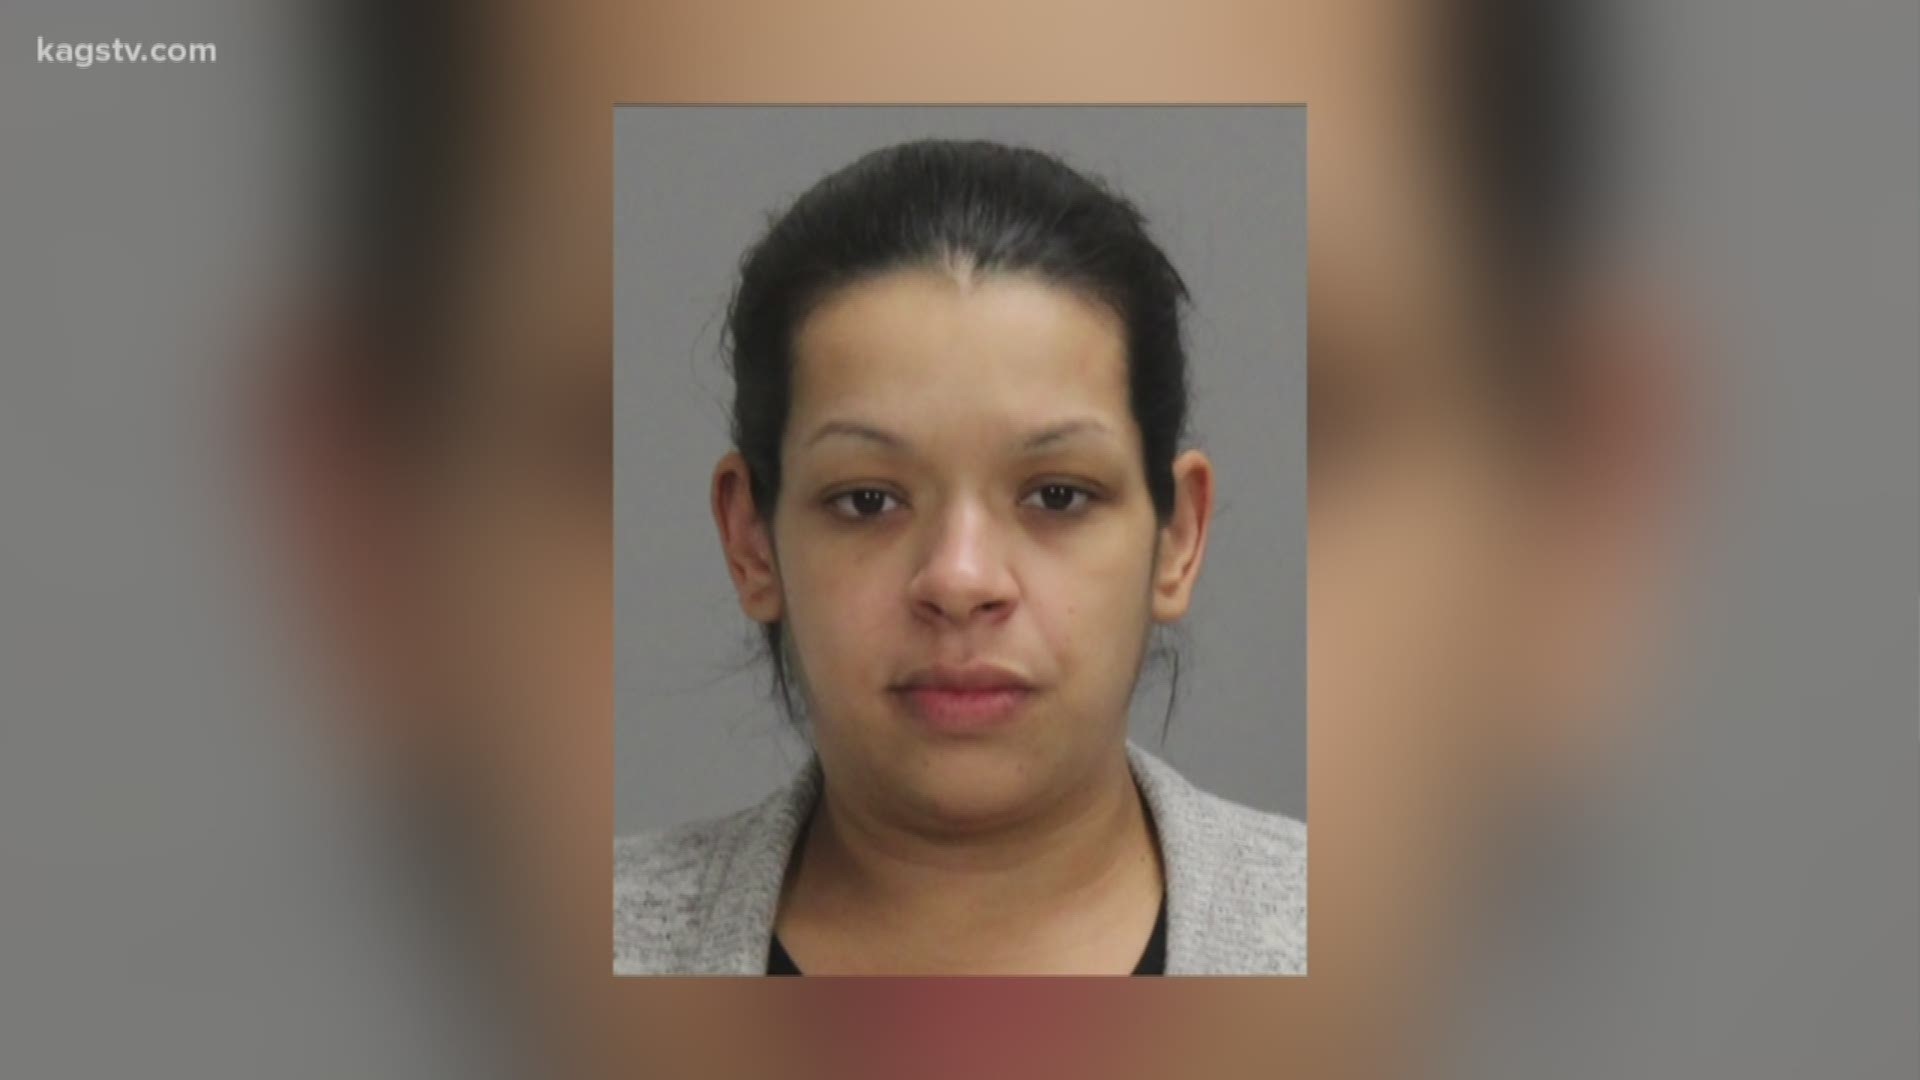 College Station police said the woman had methamphetamine in her car that was in reach of her two children in the backseat. The children are under the age of 10.